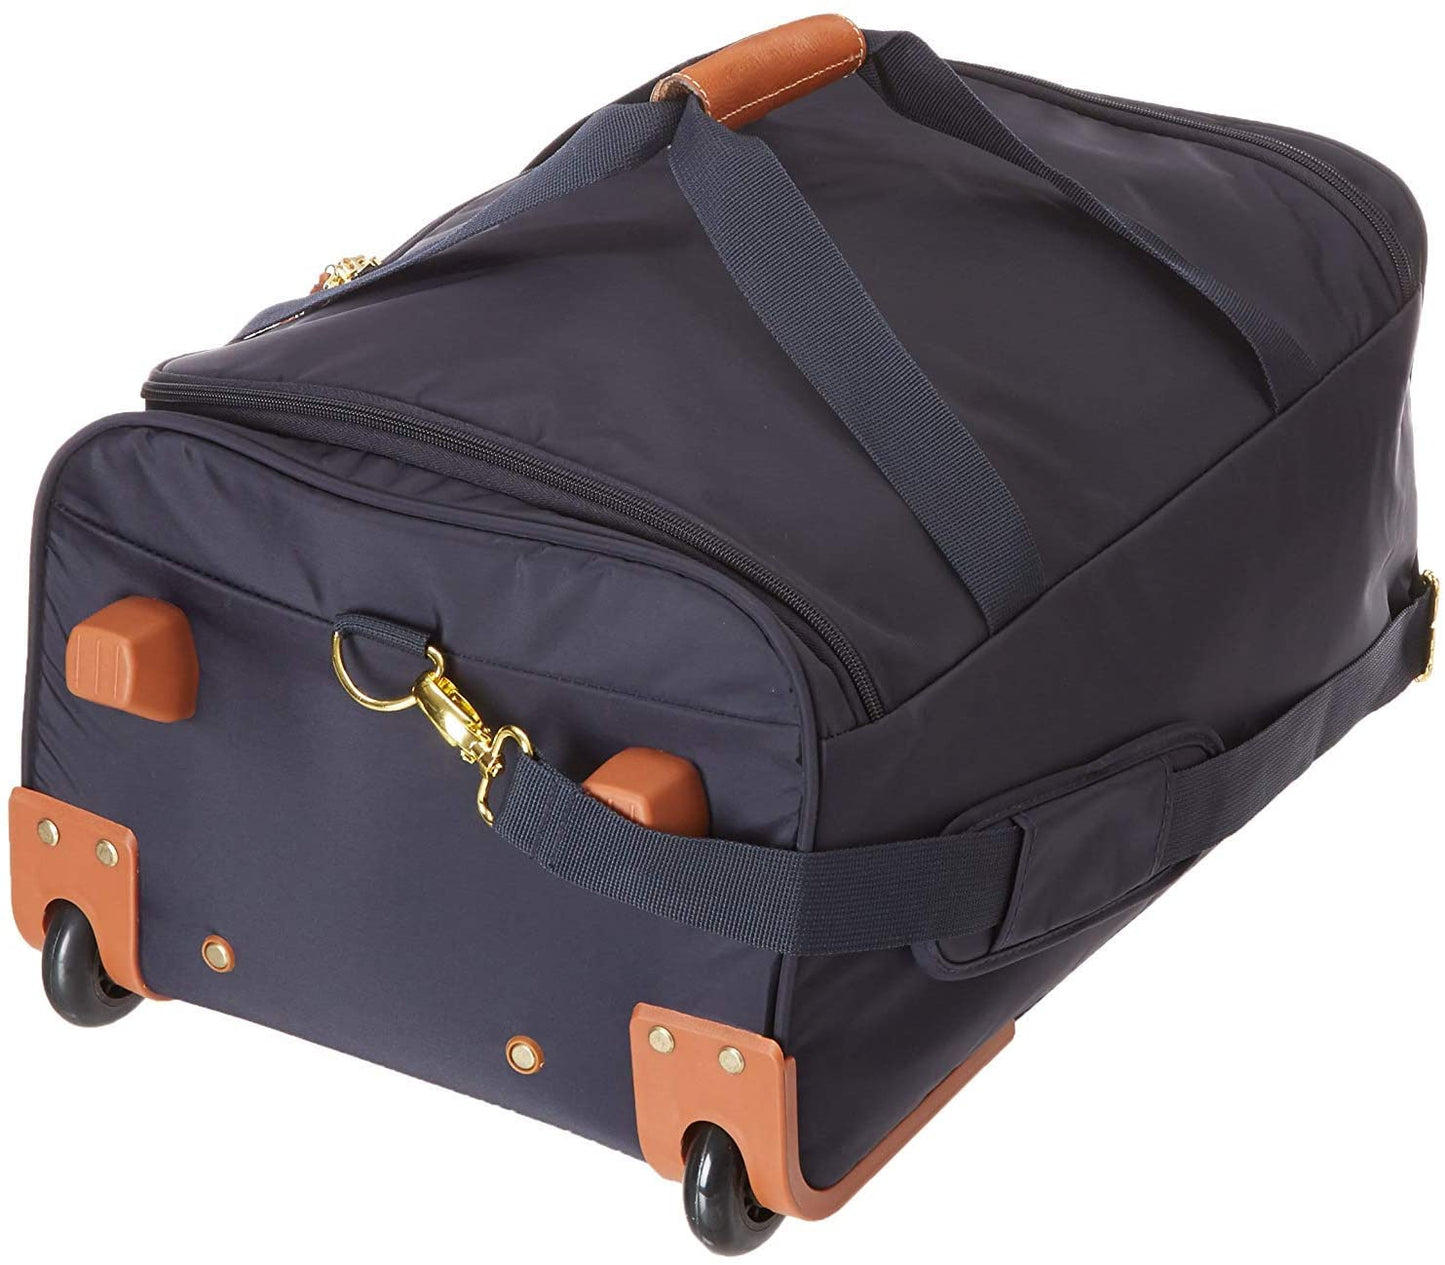 Bric's X-Bag Rolling Duffel Bag - 21 Inch Carry On 32510